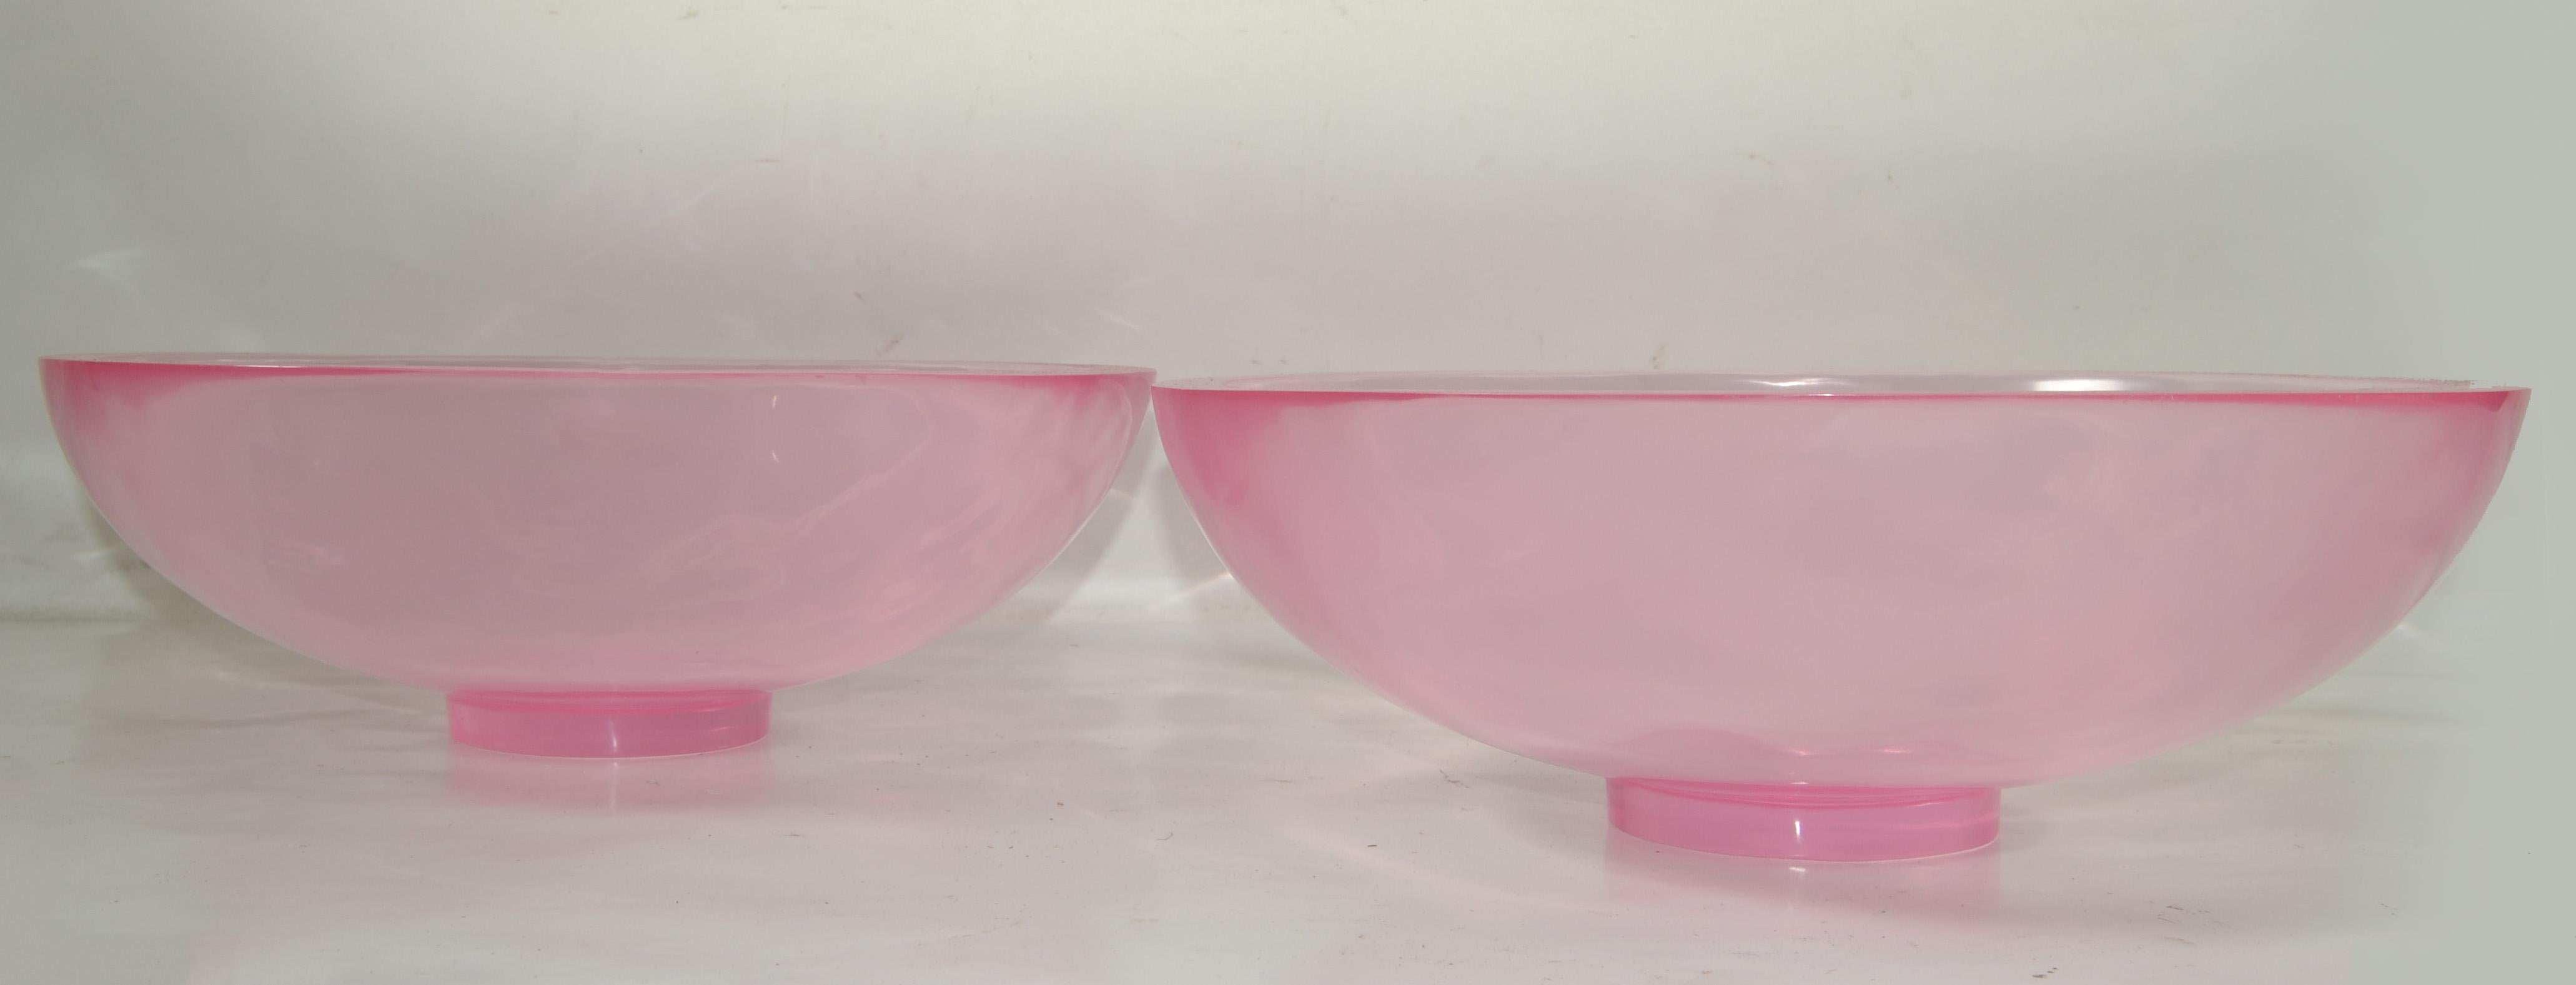 Contemporary Set of 2 Light Pink Large Polished Fiberglass Bowls Space Age Op Art For Sale